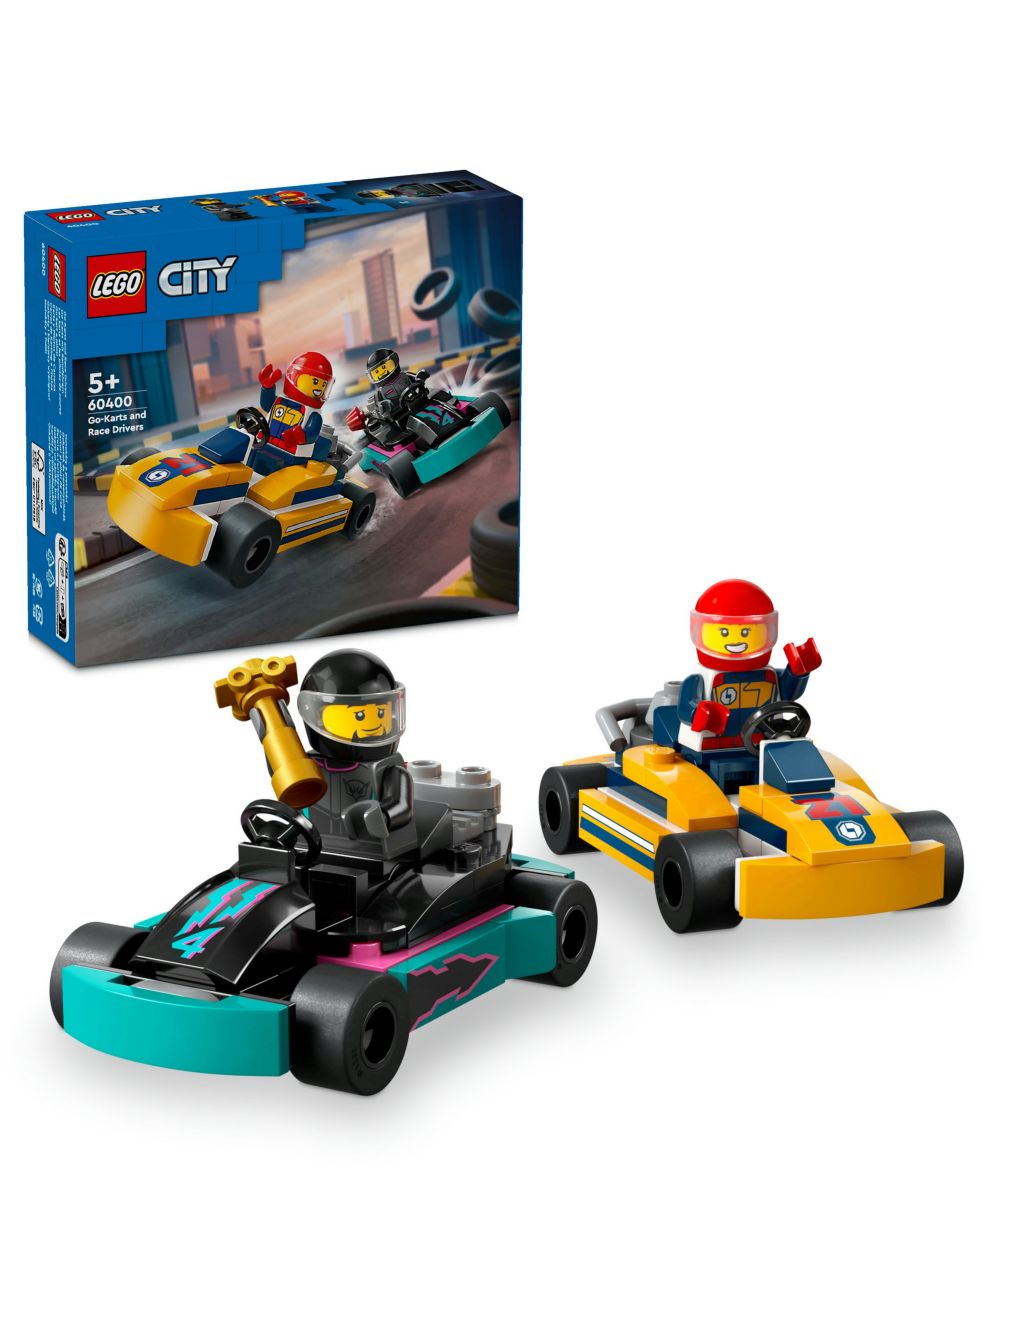 LEGO® City Go-Karts and Race Drivers Toy Set 60400 (5+ Yrs)